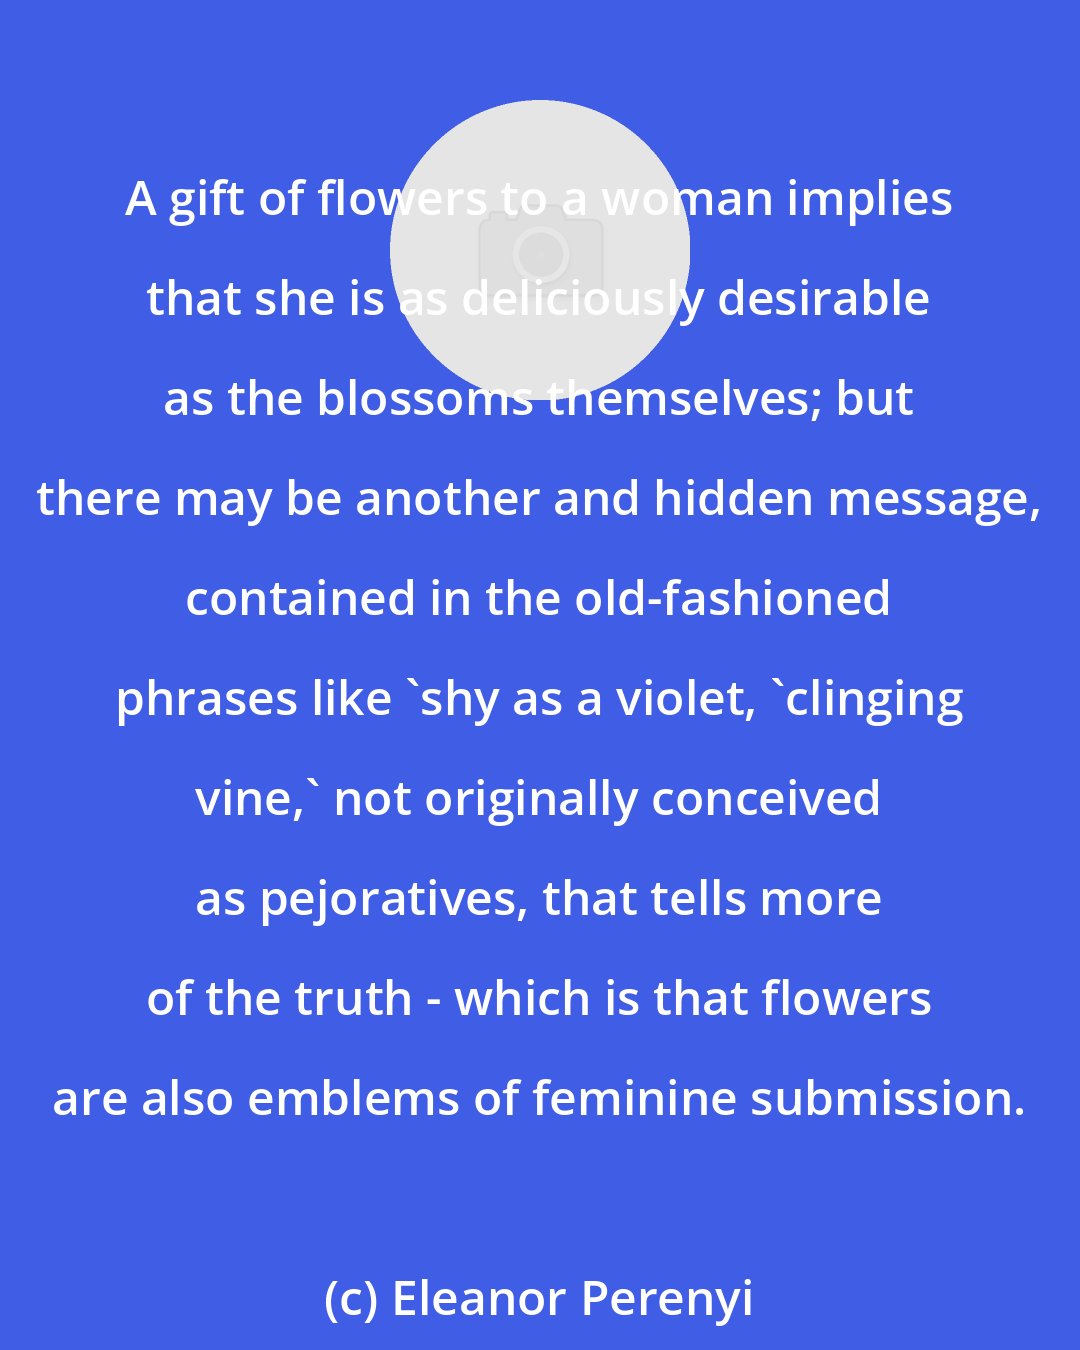 Eleanor Perenyi: A gift of flowers to a woman implies that she is as deliciously desirable as the blossoms themselves; but there may be another and hidden message, contained in the old-fashioned phrases like 'shy as a violet, 'clinging vine,' not originally conceived as pejoratives, that tells more of the truth - which is that flowers are also emblems of feminine submission.